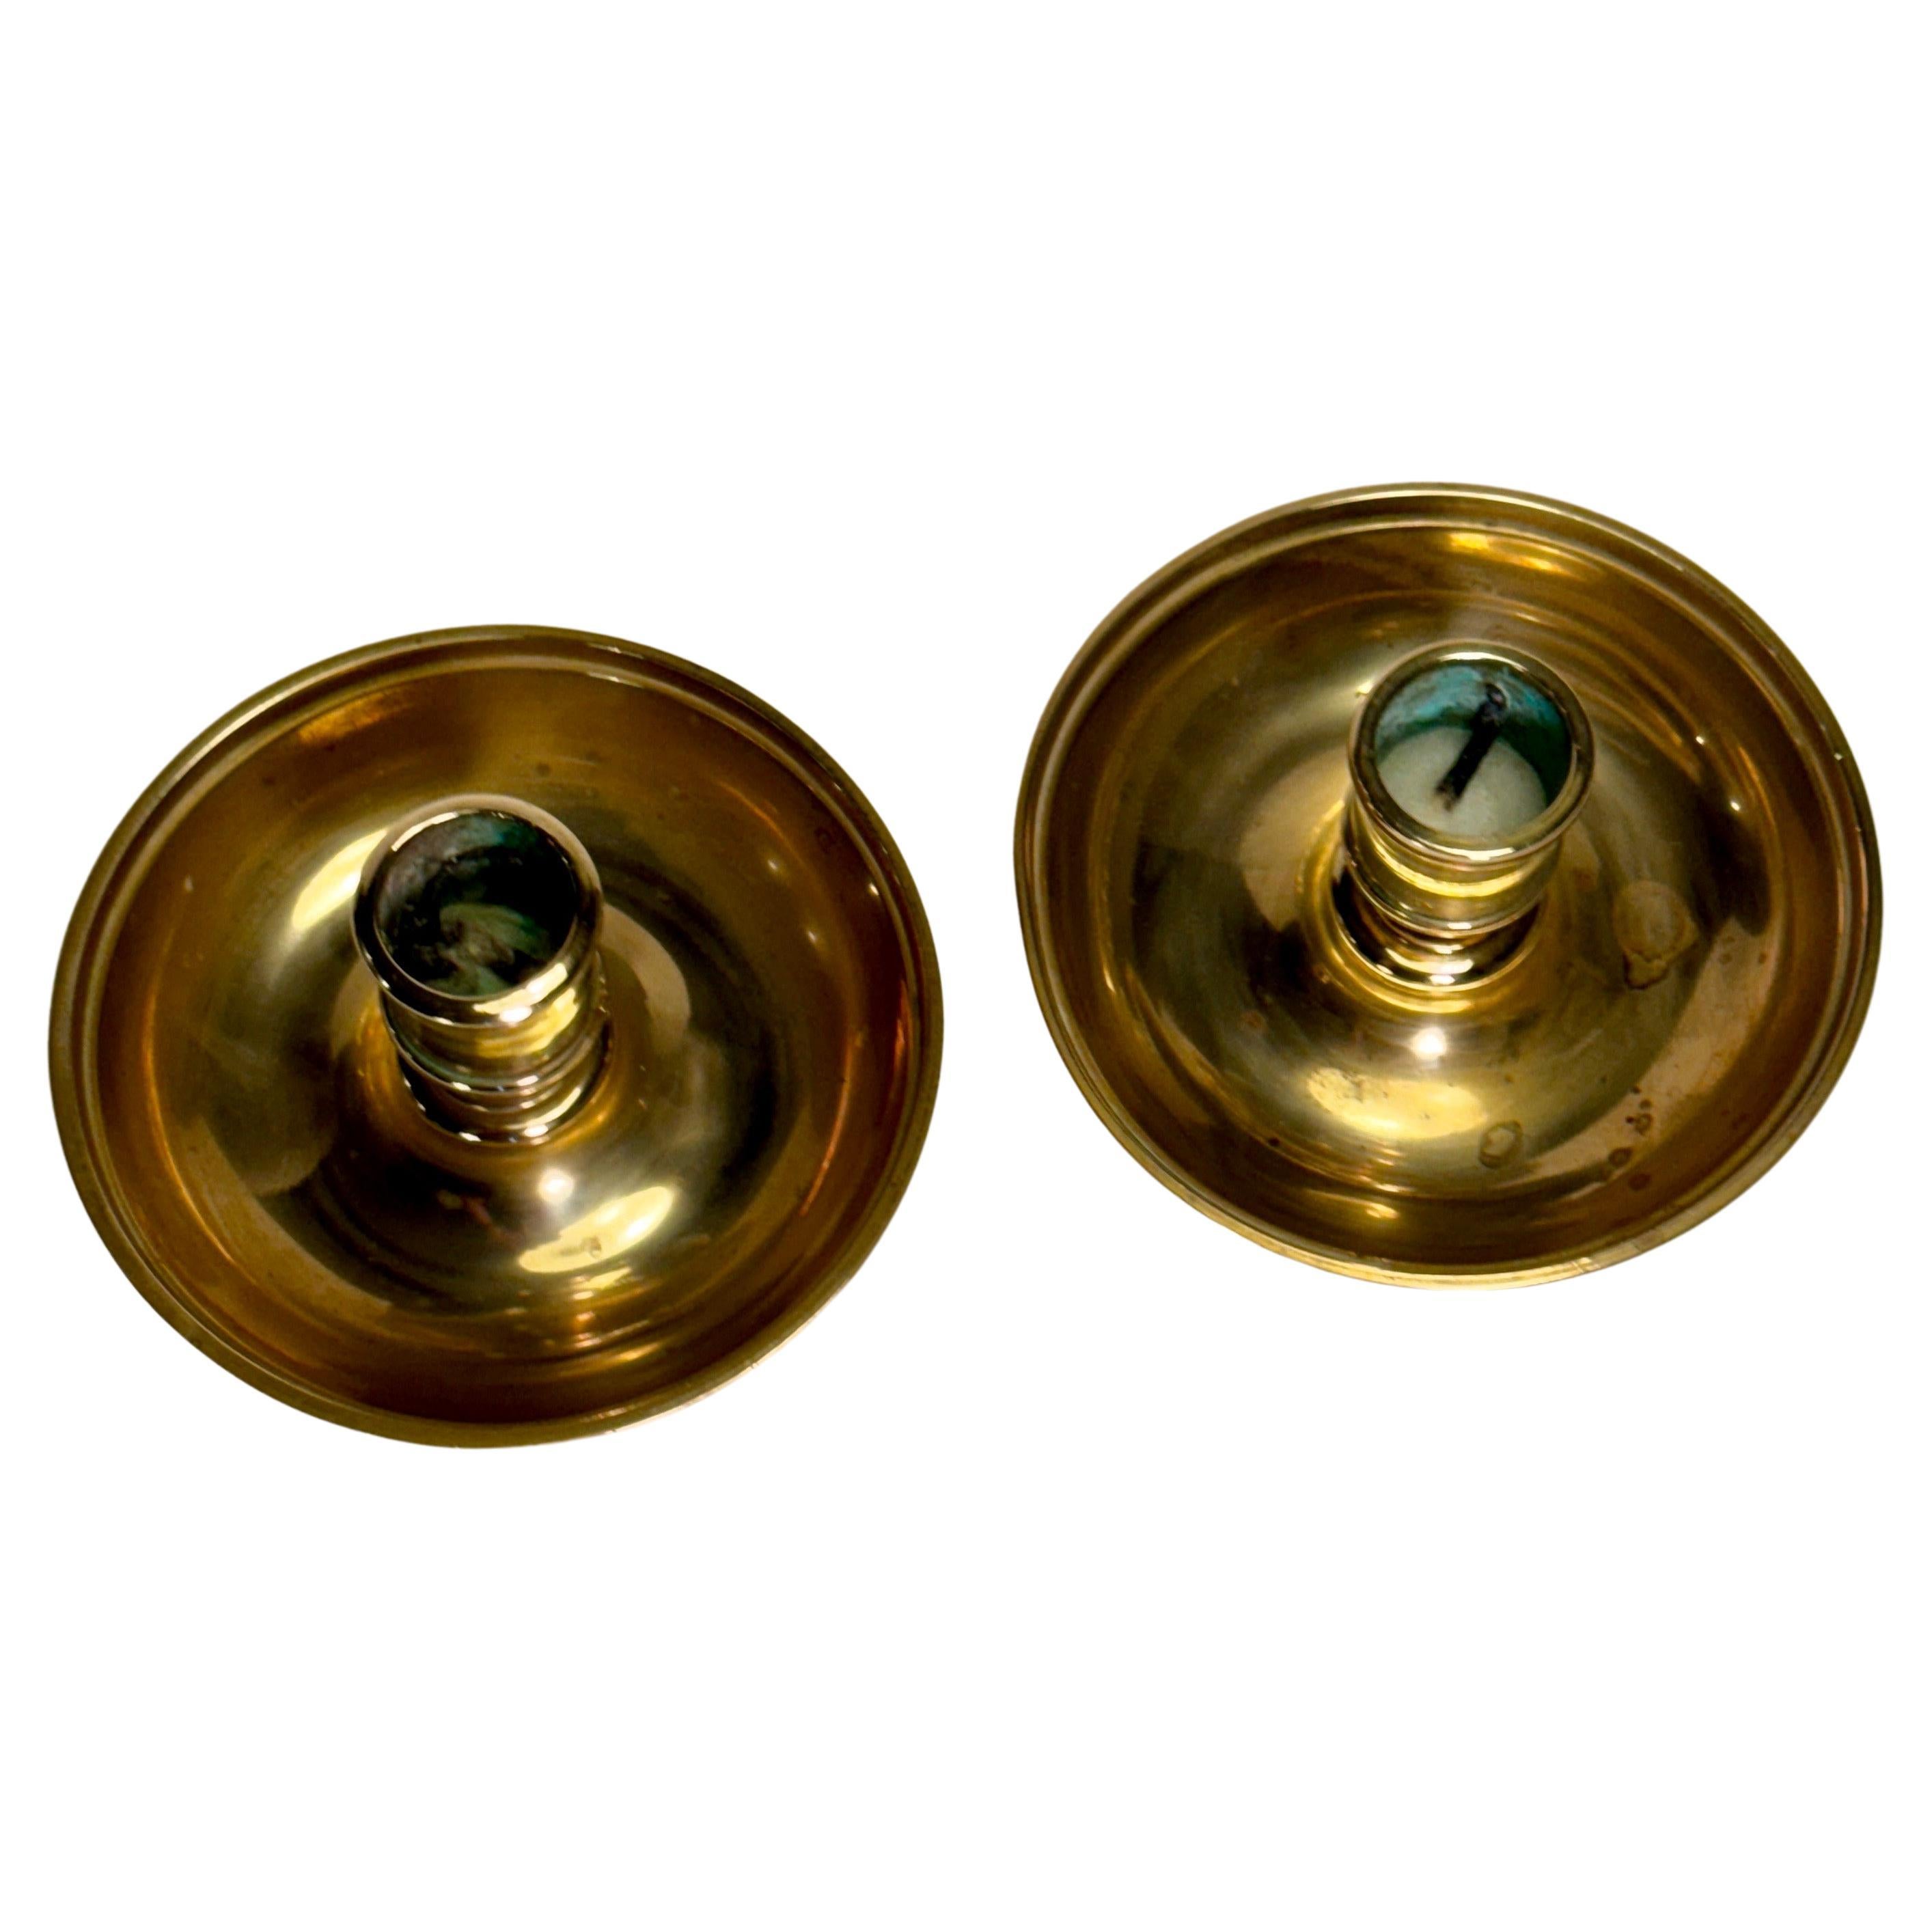 Set of two small travel candlesticks in brass. The set can easily disassemble into 4 parts, two bases and two candleholders. The four parts can then be assembled into a pair of candlesticks. This neat little trick makes them perfect for travel and